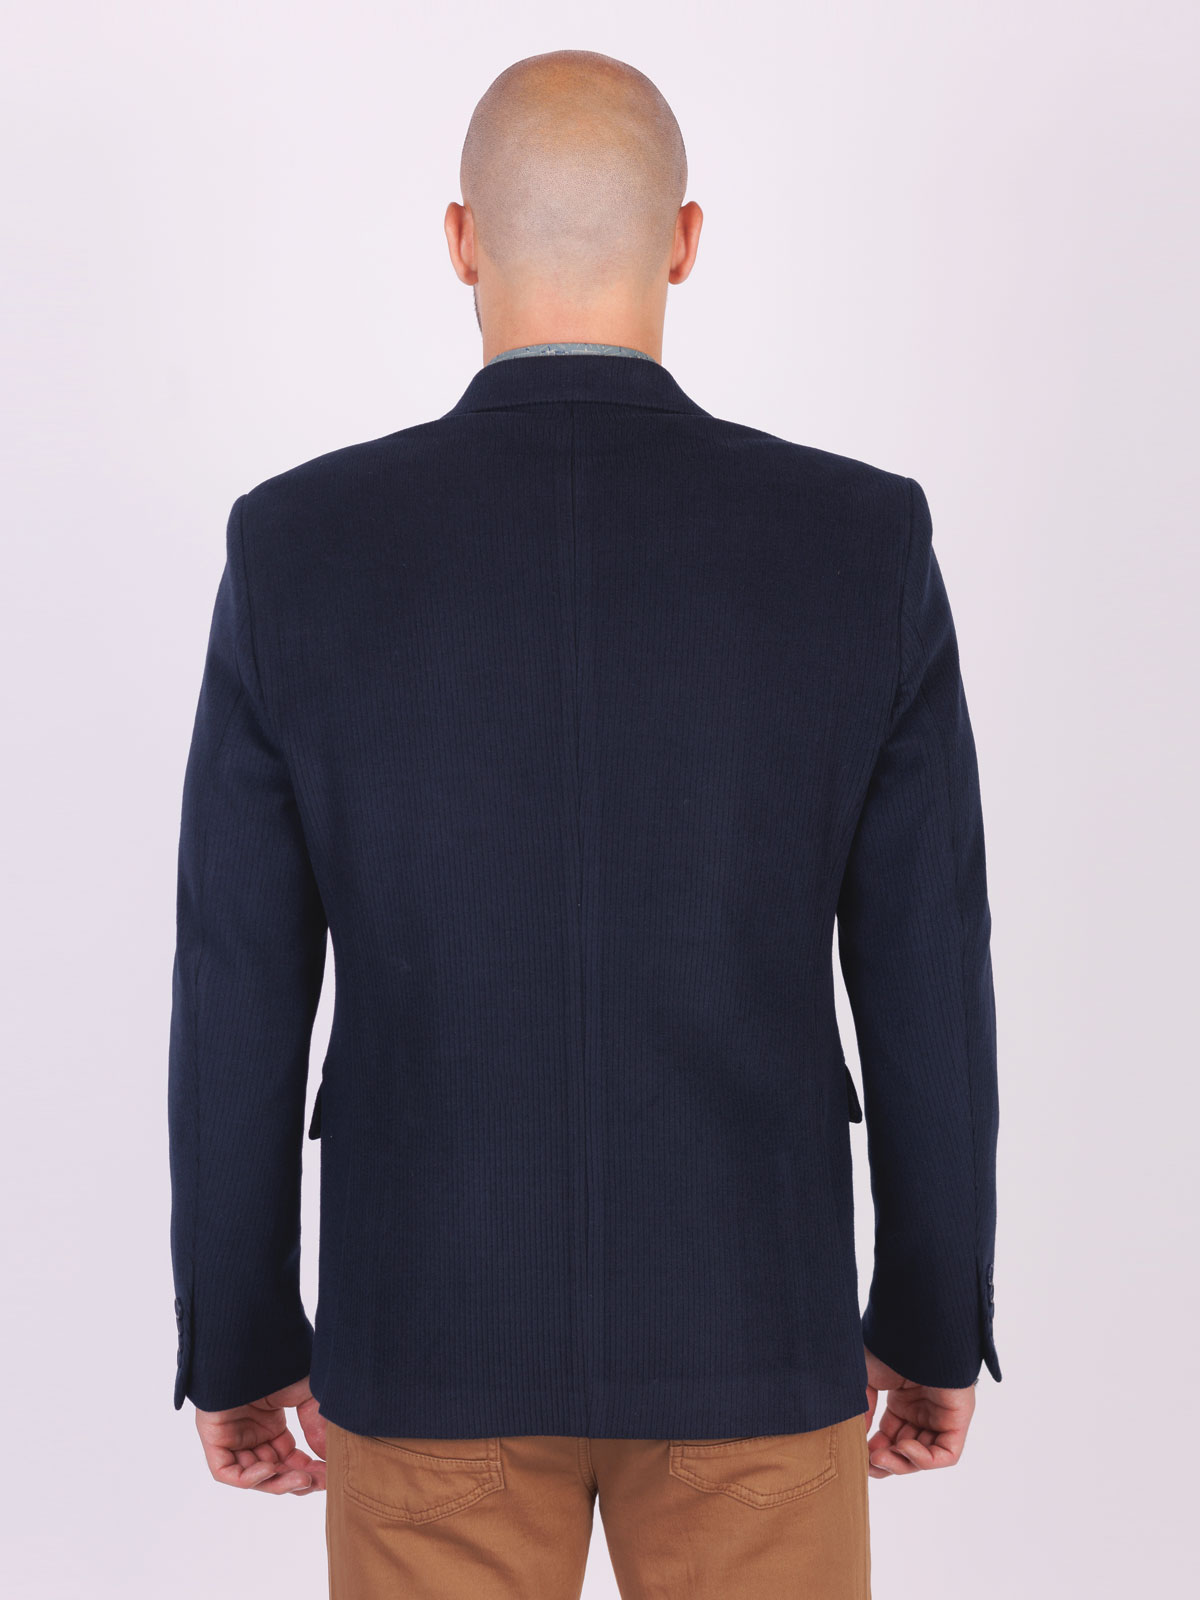 Mens sports jacket in blue - 61096 € 145.10 img2